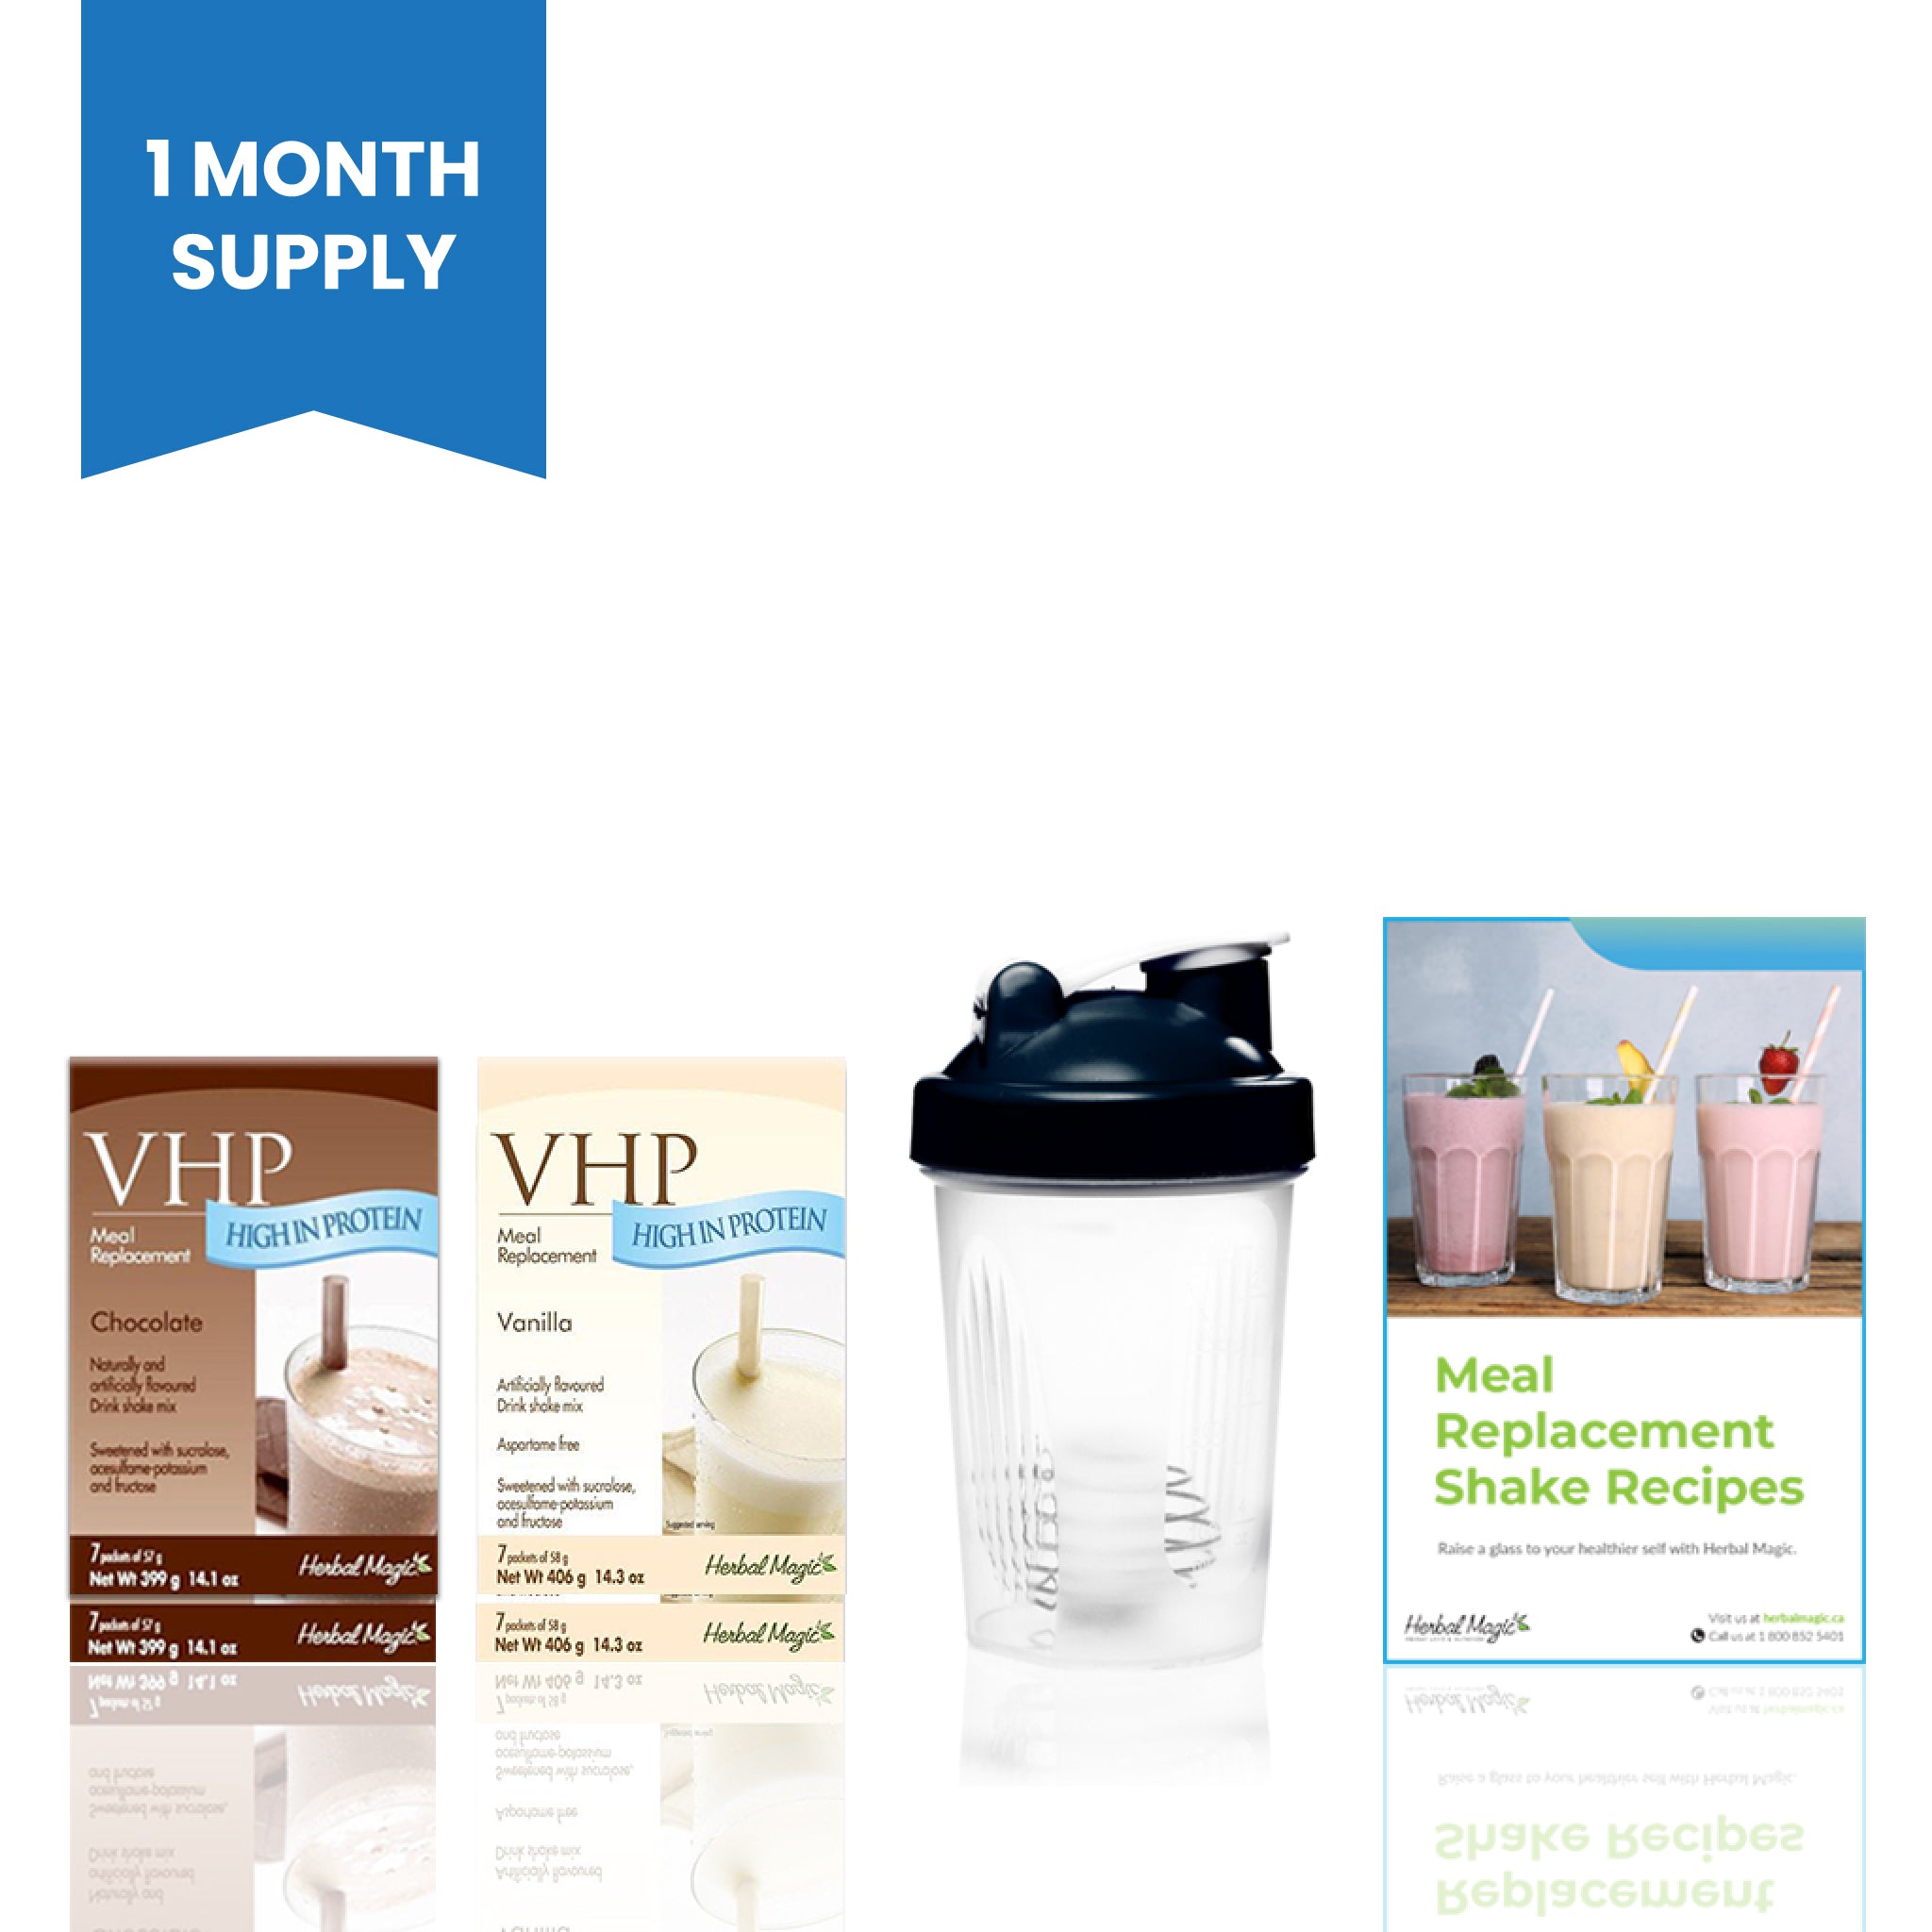 The 50/50 Meal Replacement Shakes Kit includes a 1-month supply of chocolate (2 boxes) and vanilla (2 boxes) VHP shakes!